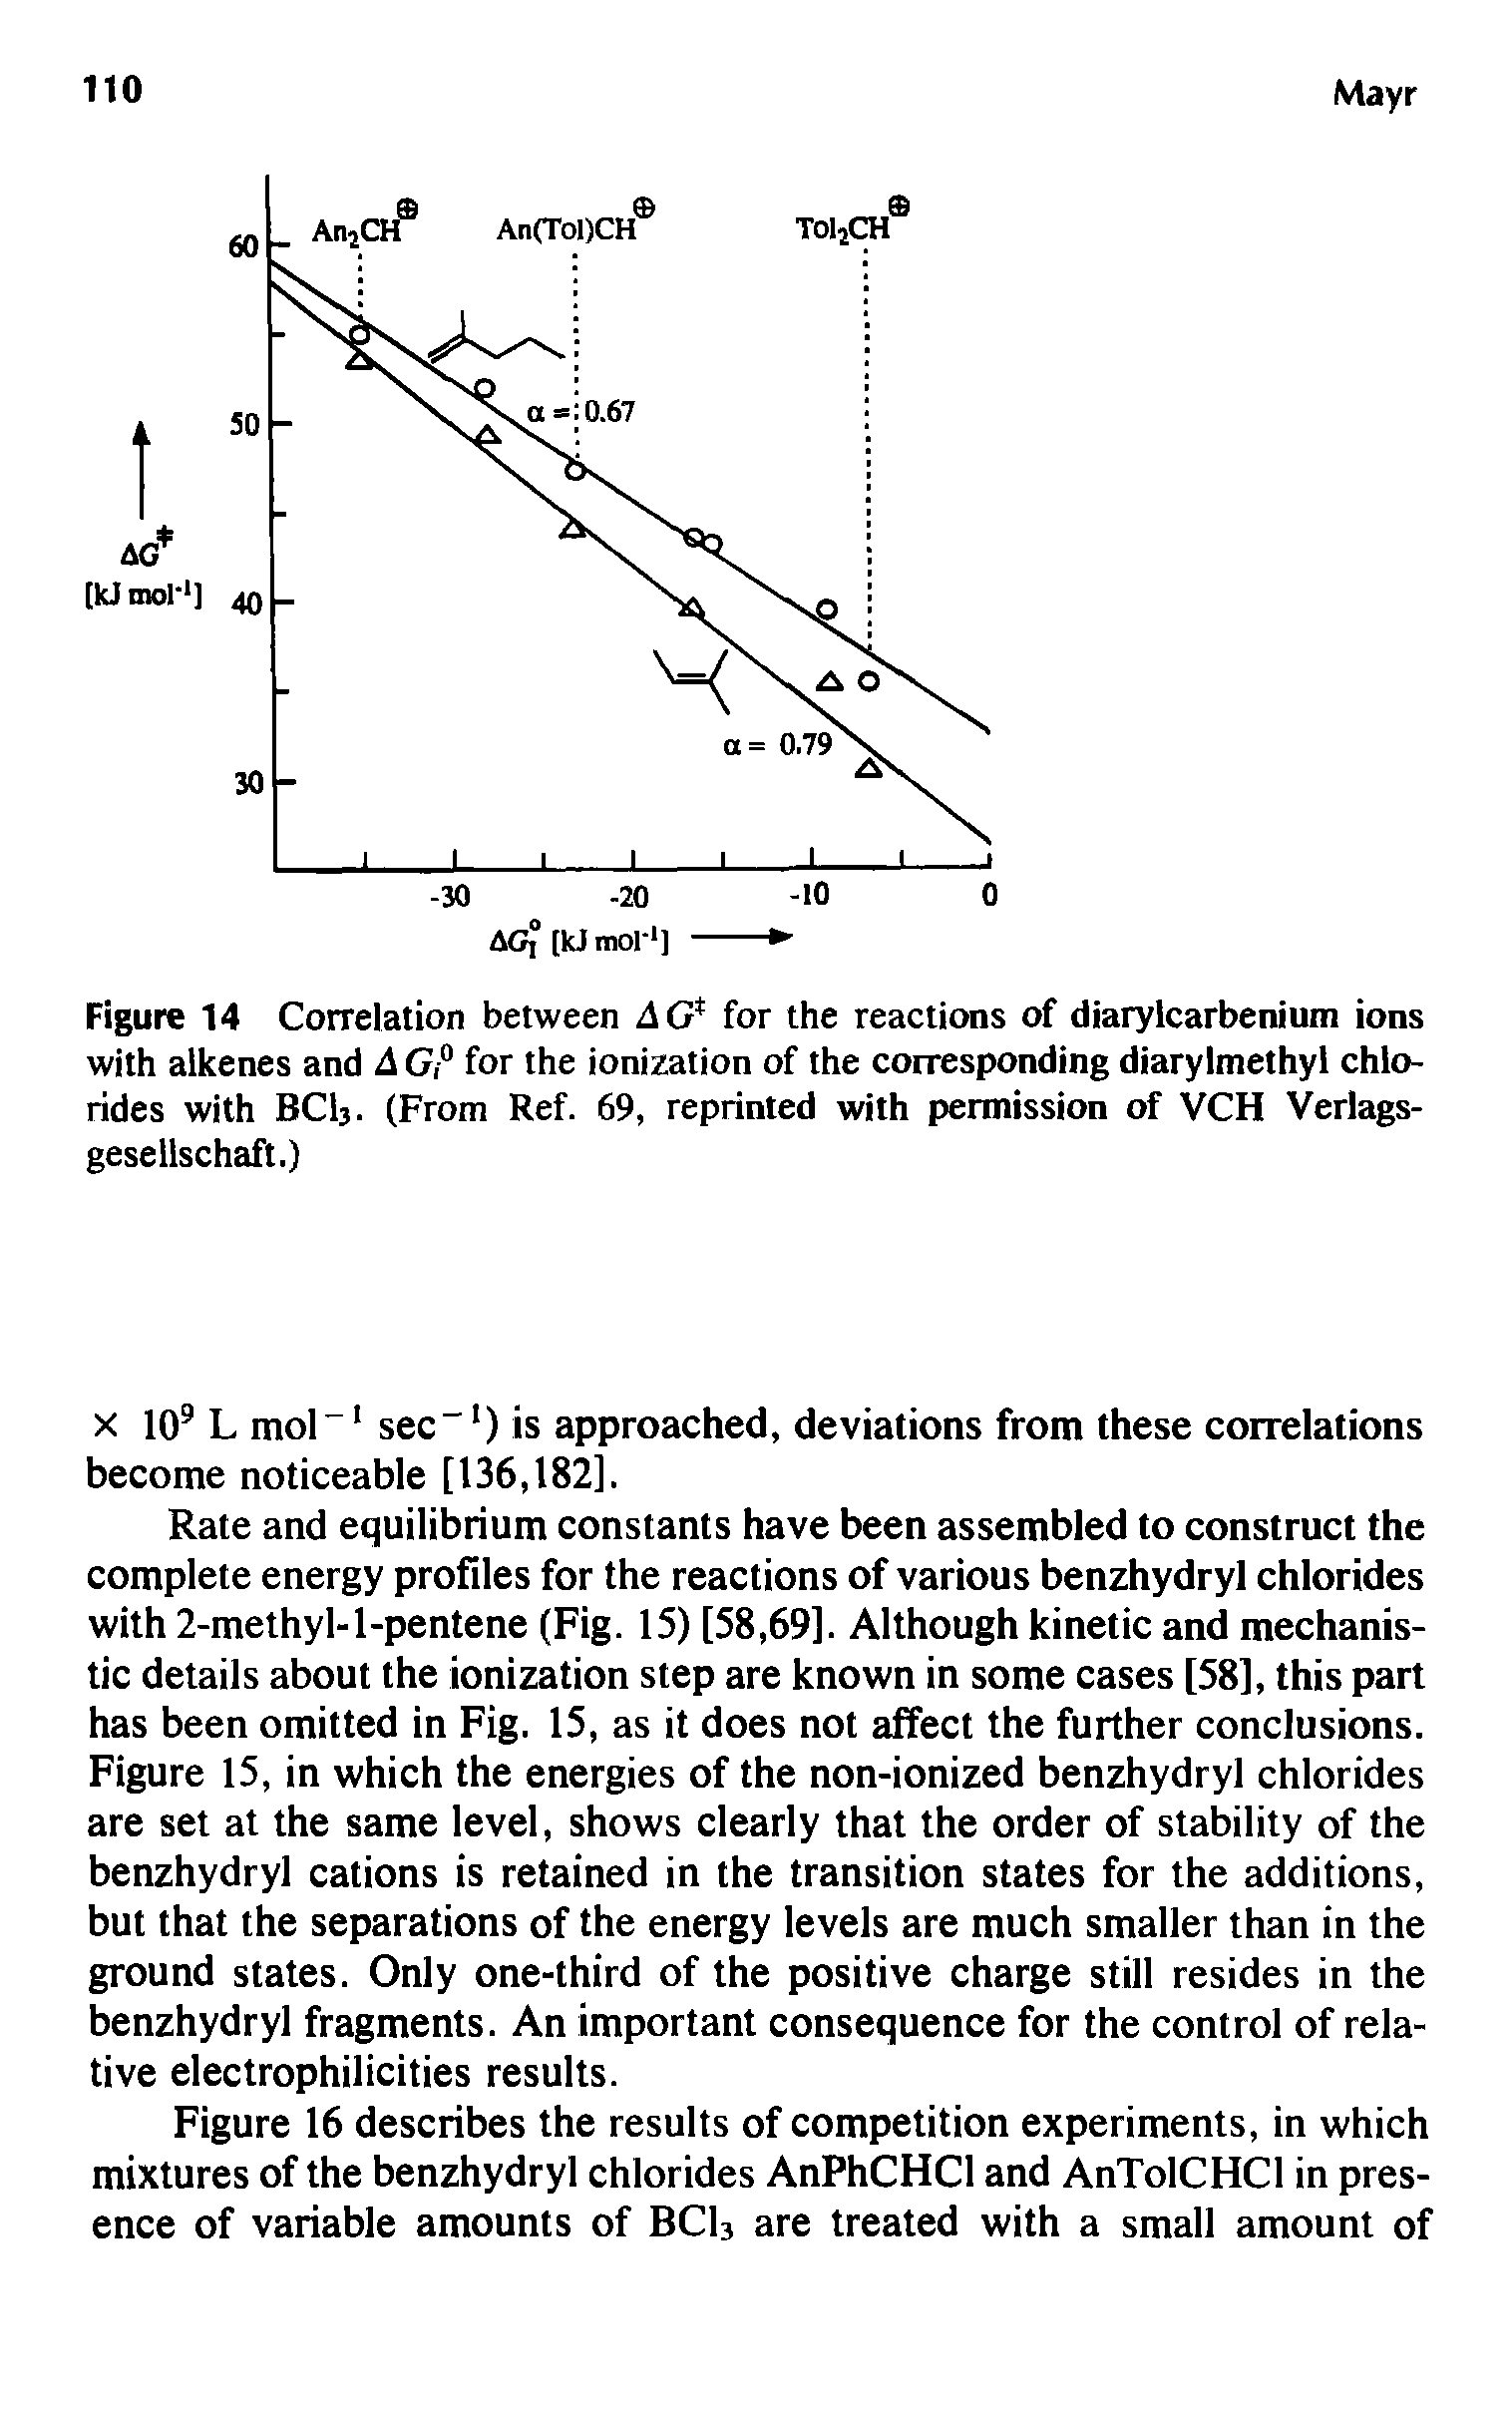 Figure 14 Correlation between AG for the reactions of diarylcarbenium ions with alkenes and A G,° for the ionization of the corresponding diarylmethyl chlorides with BCI3. (From Ref. 69, reprinted with permission of VCH Verlags-gesellschaft.)...